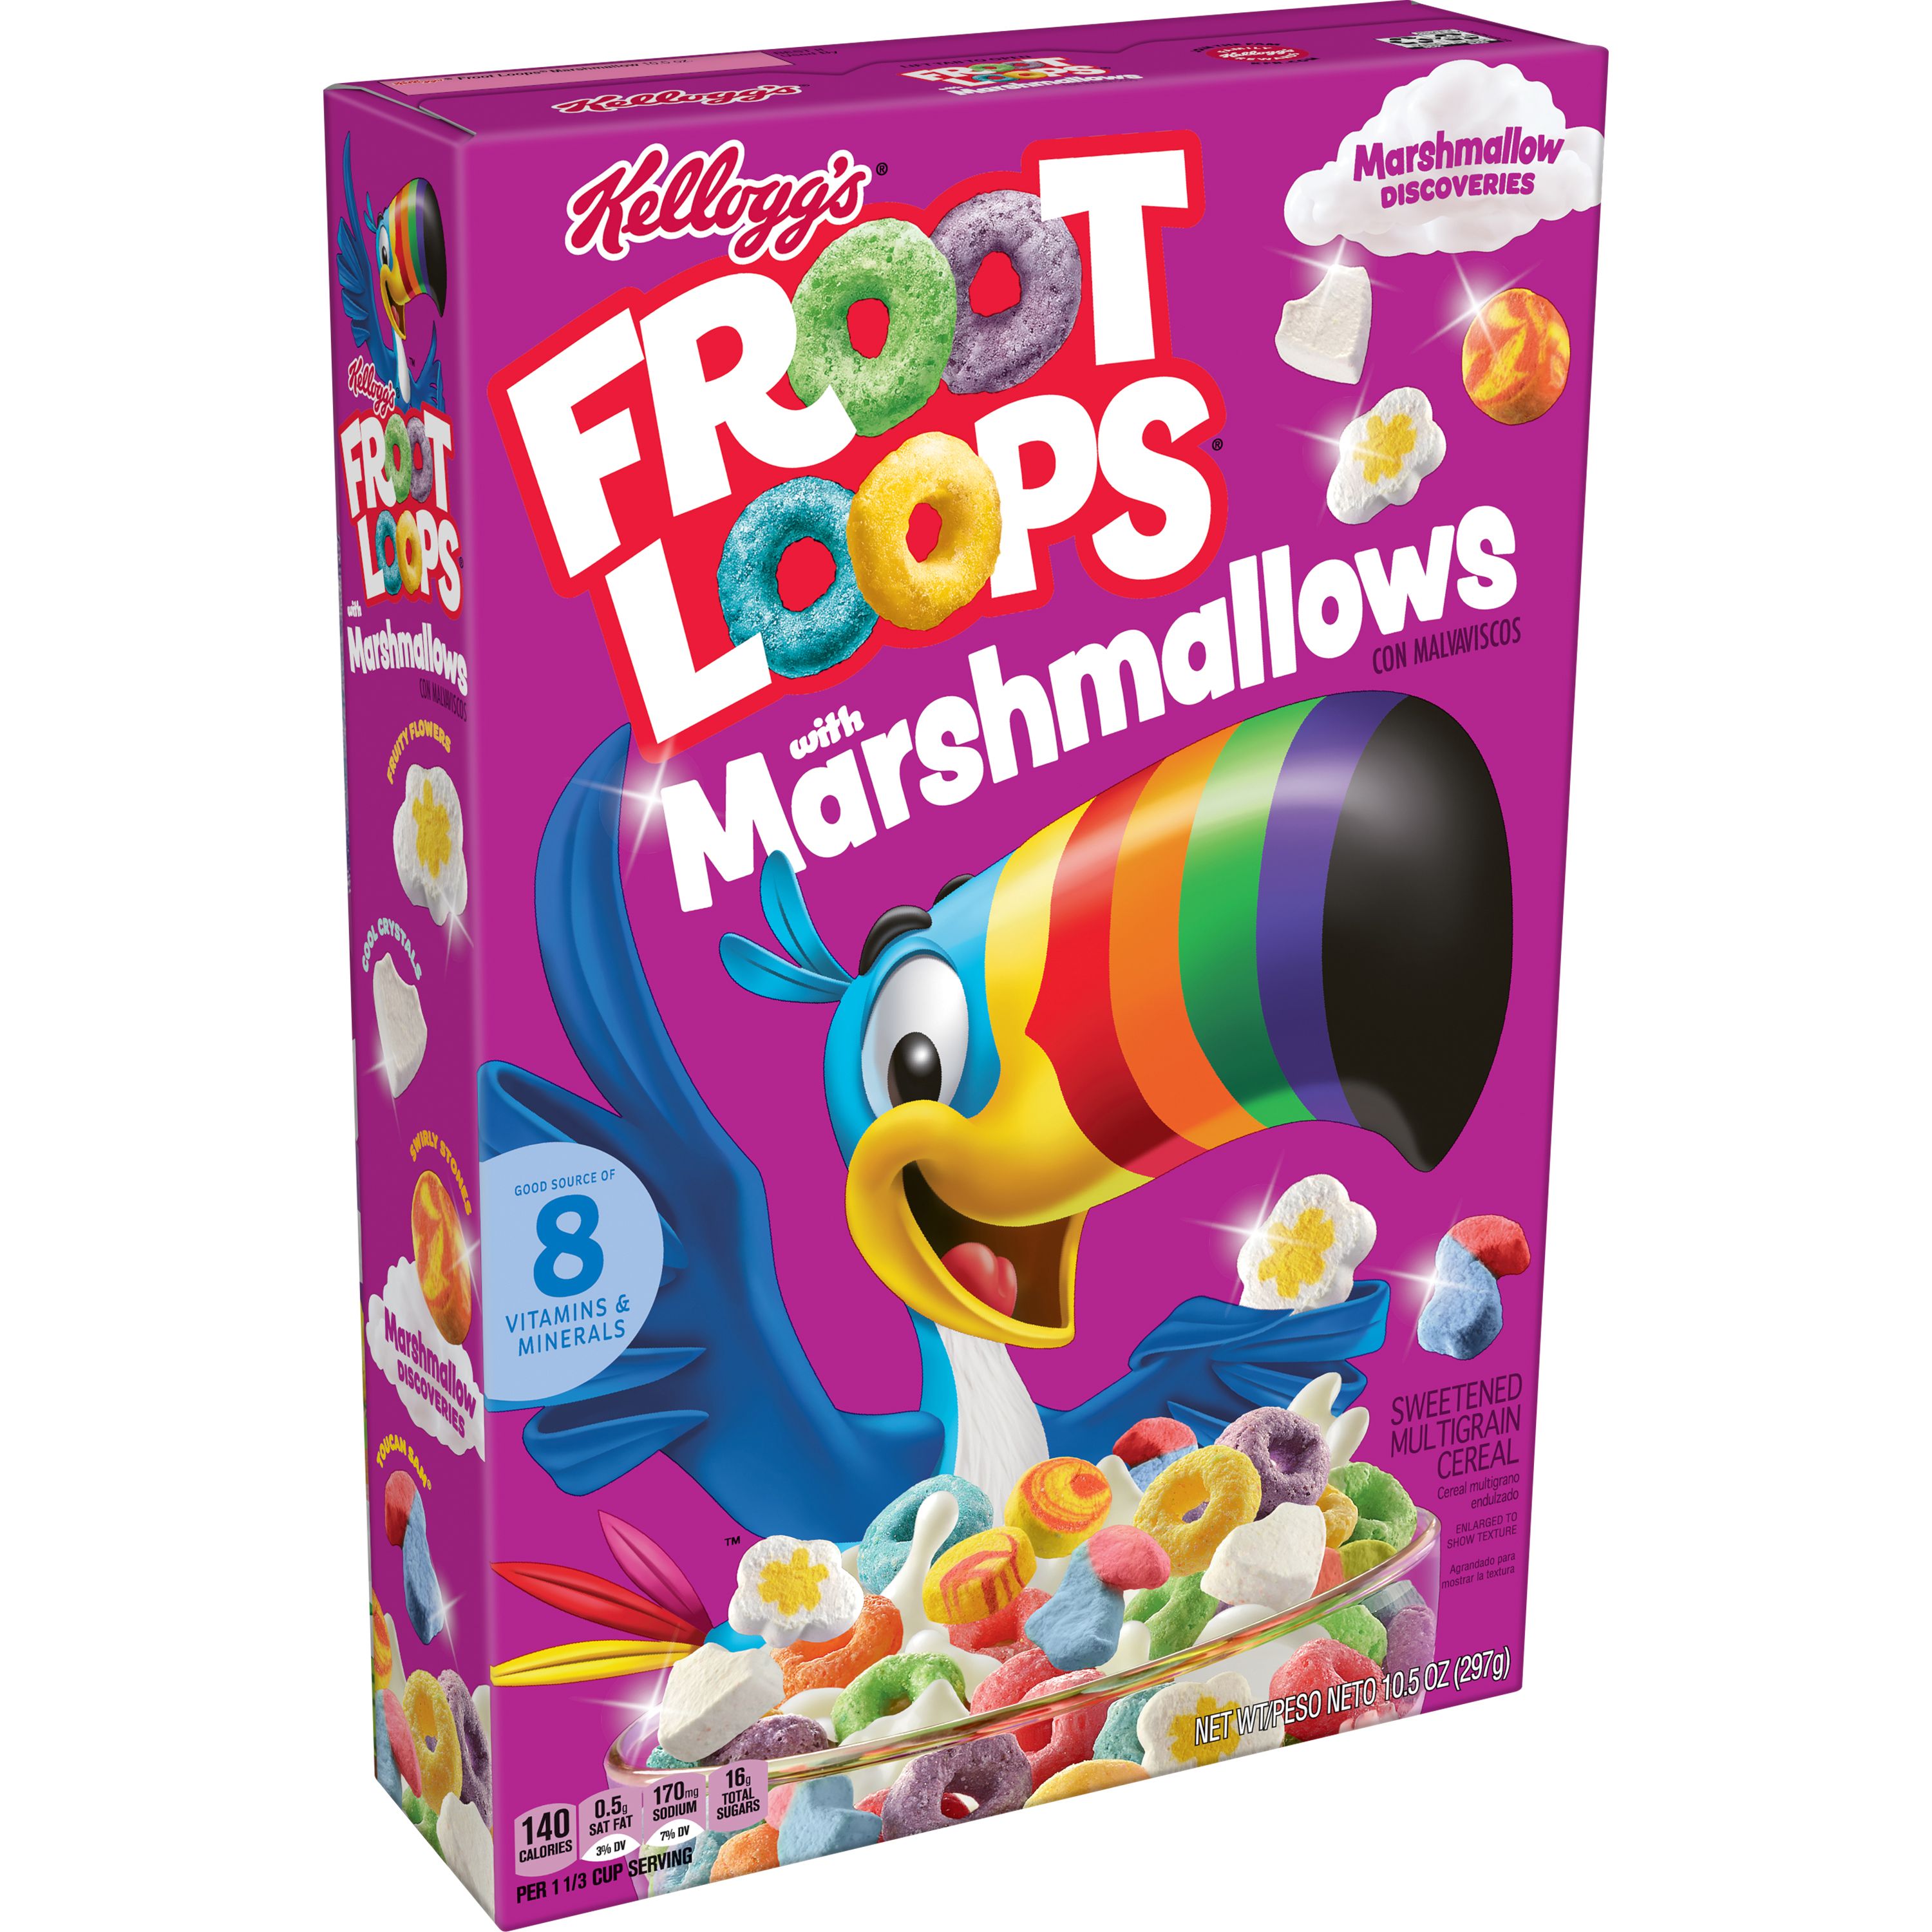 Kellogg’s® Froot Loops® with Marshmallows Cereal - SmartLabel™